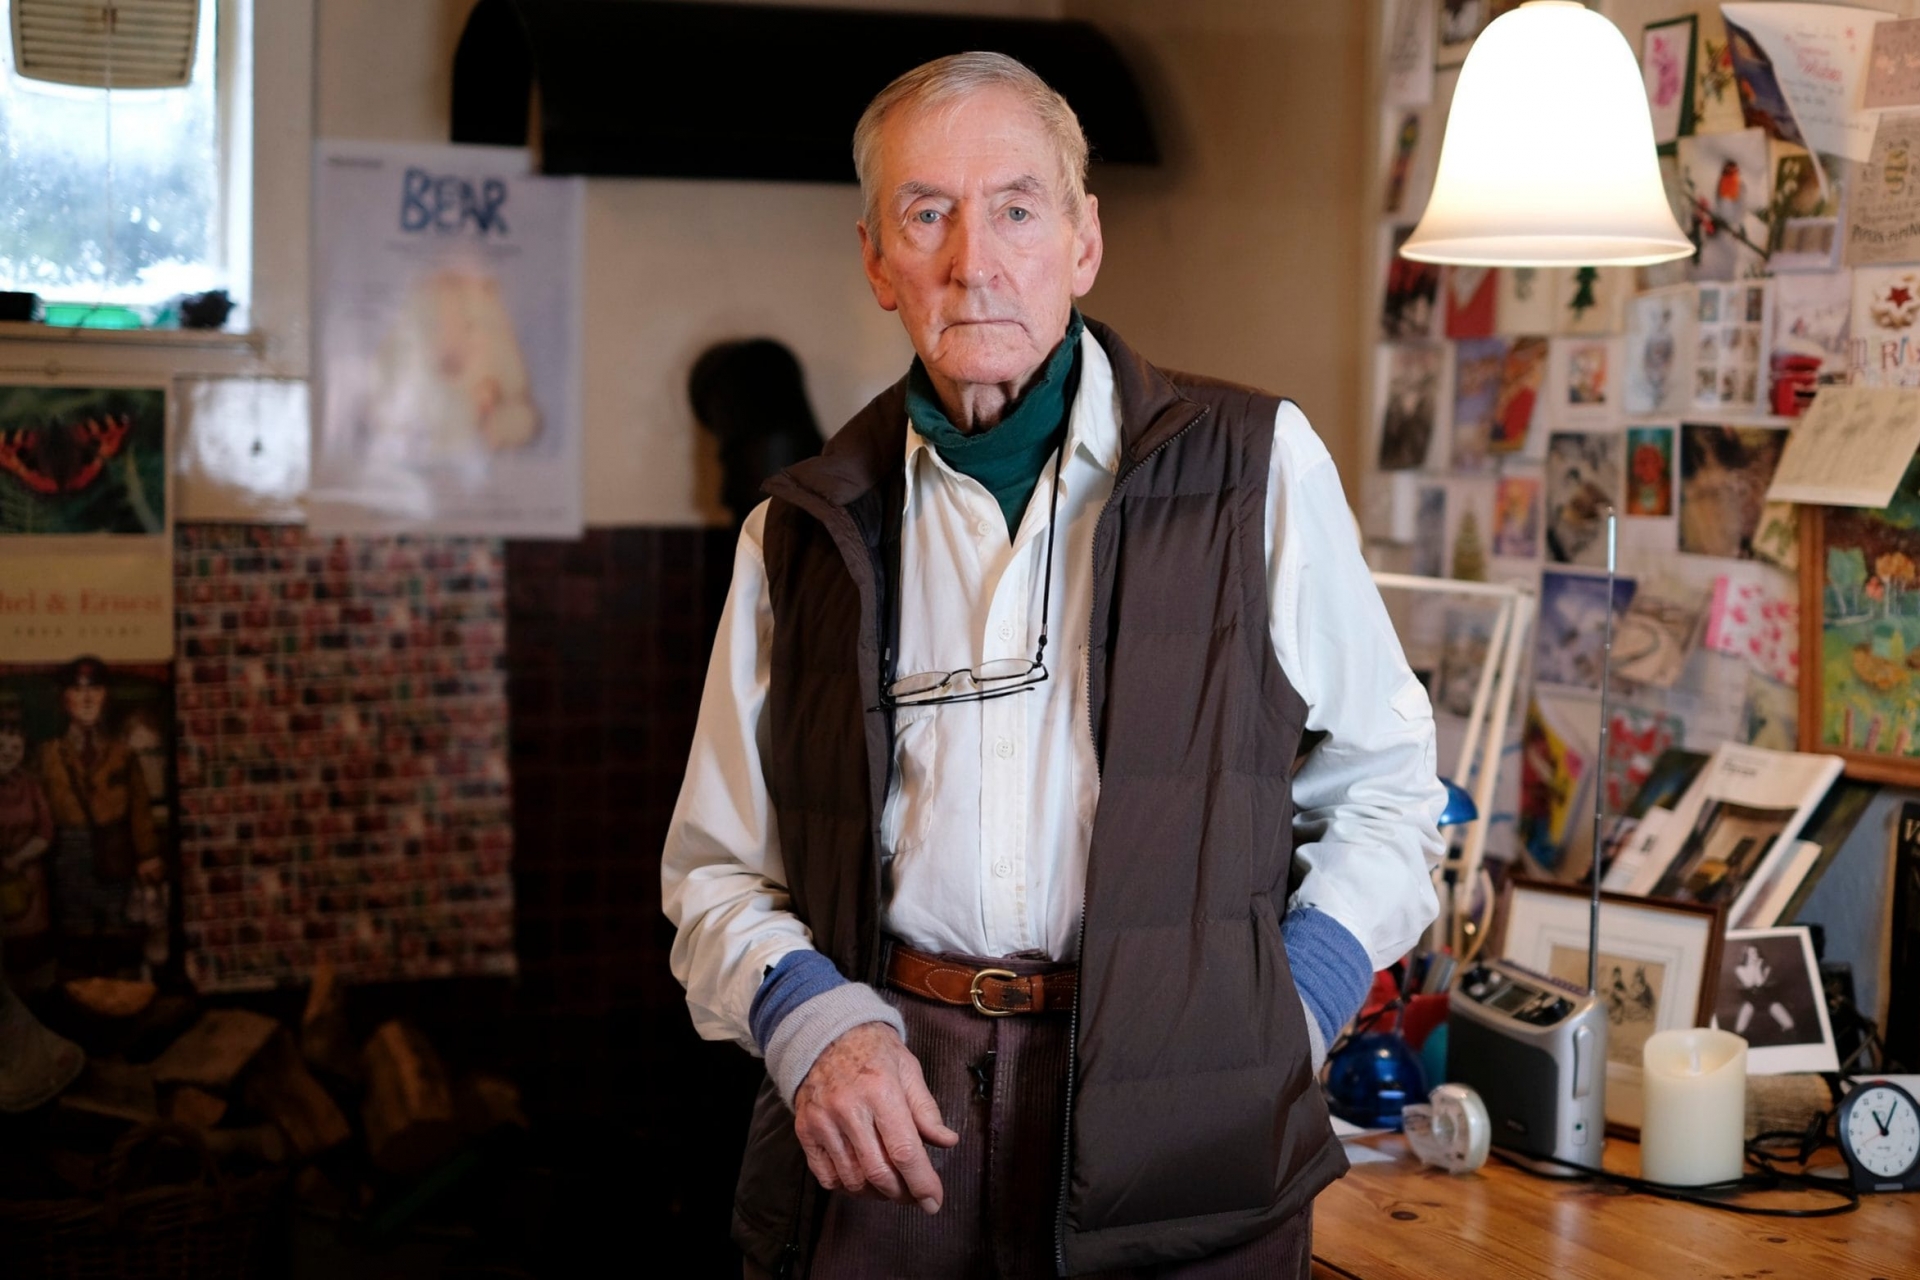 Author and illustrator Raymond Briggs, creator of the Christmas classic, The Snowman, dies aged 88 